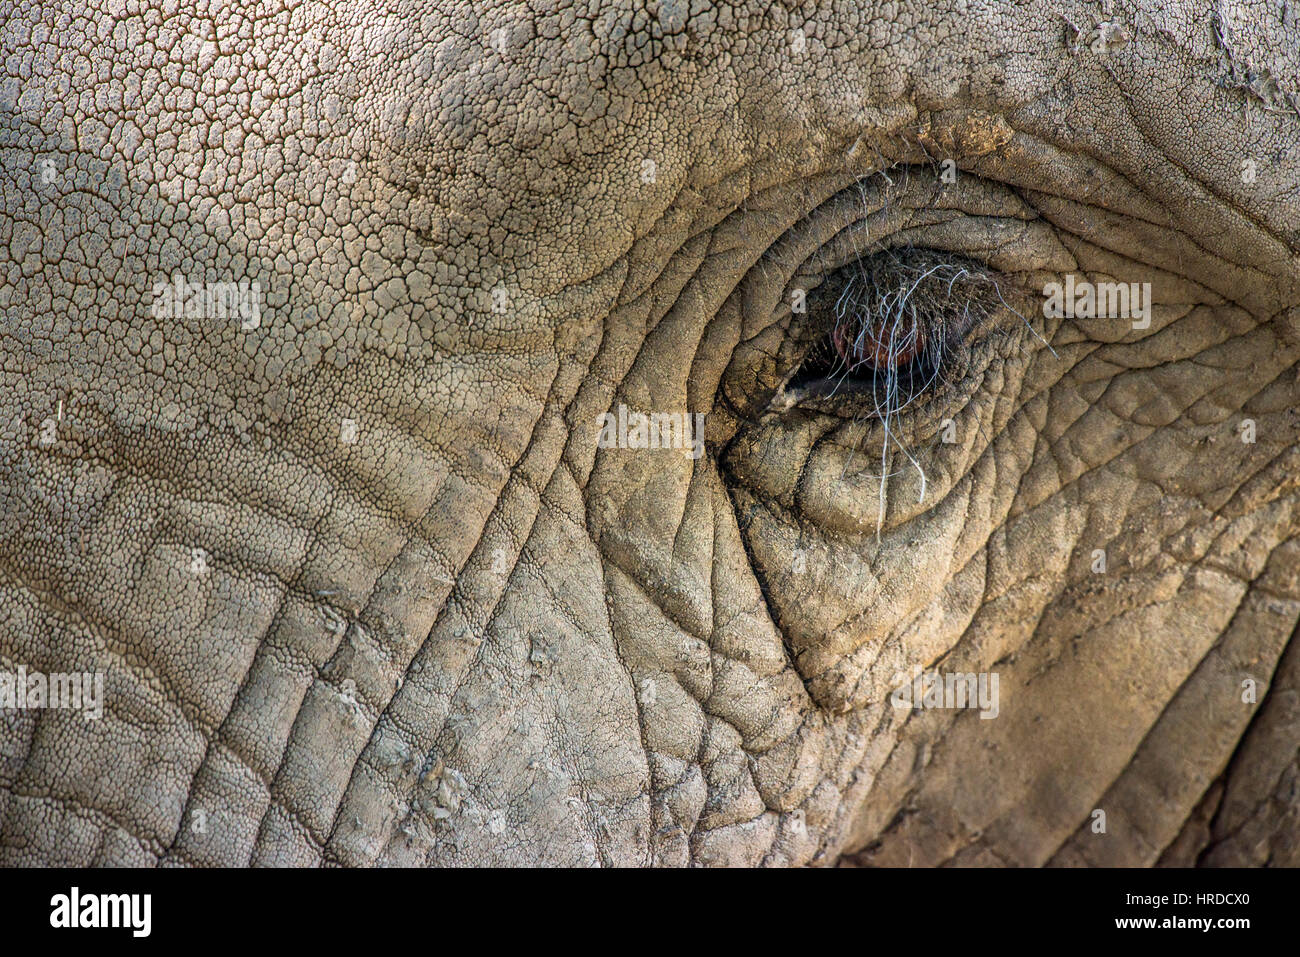 Eye detail of an elephant with wrinkled skin. Animal in captivity. Stock Photo